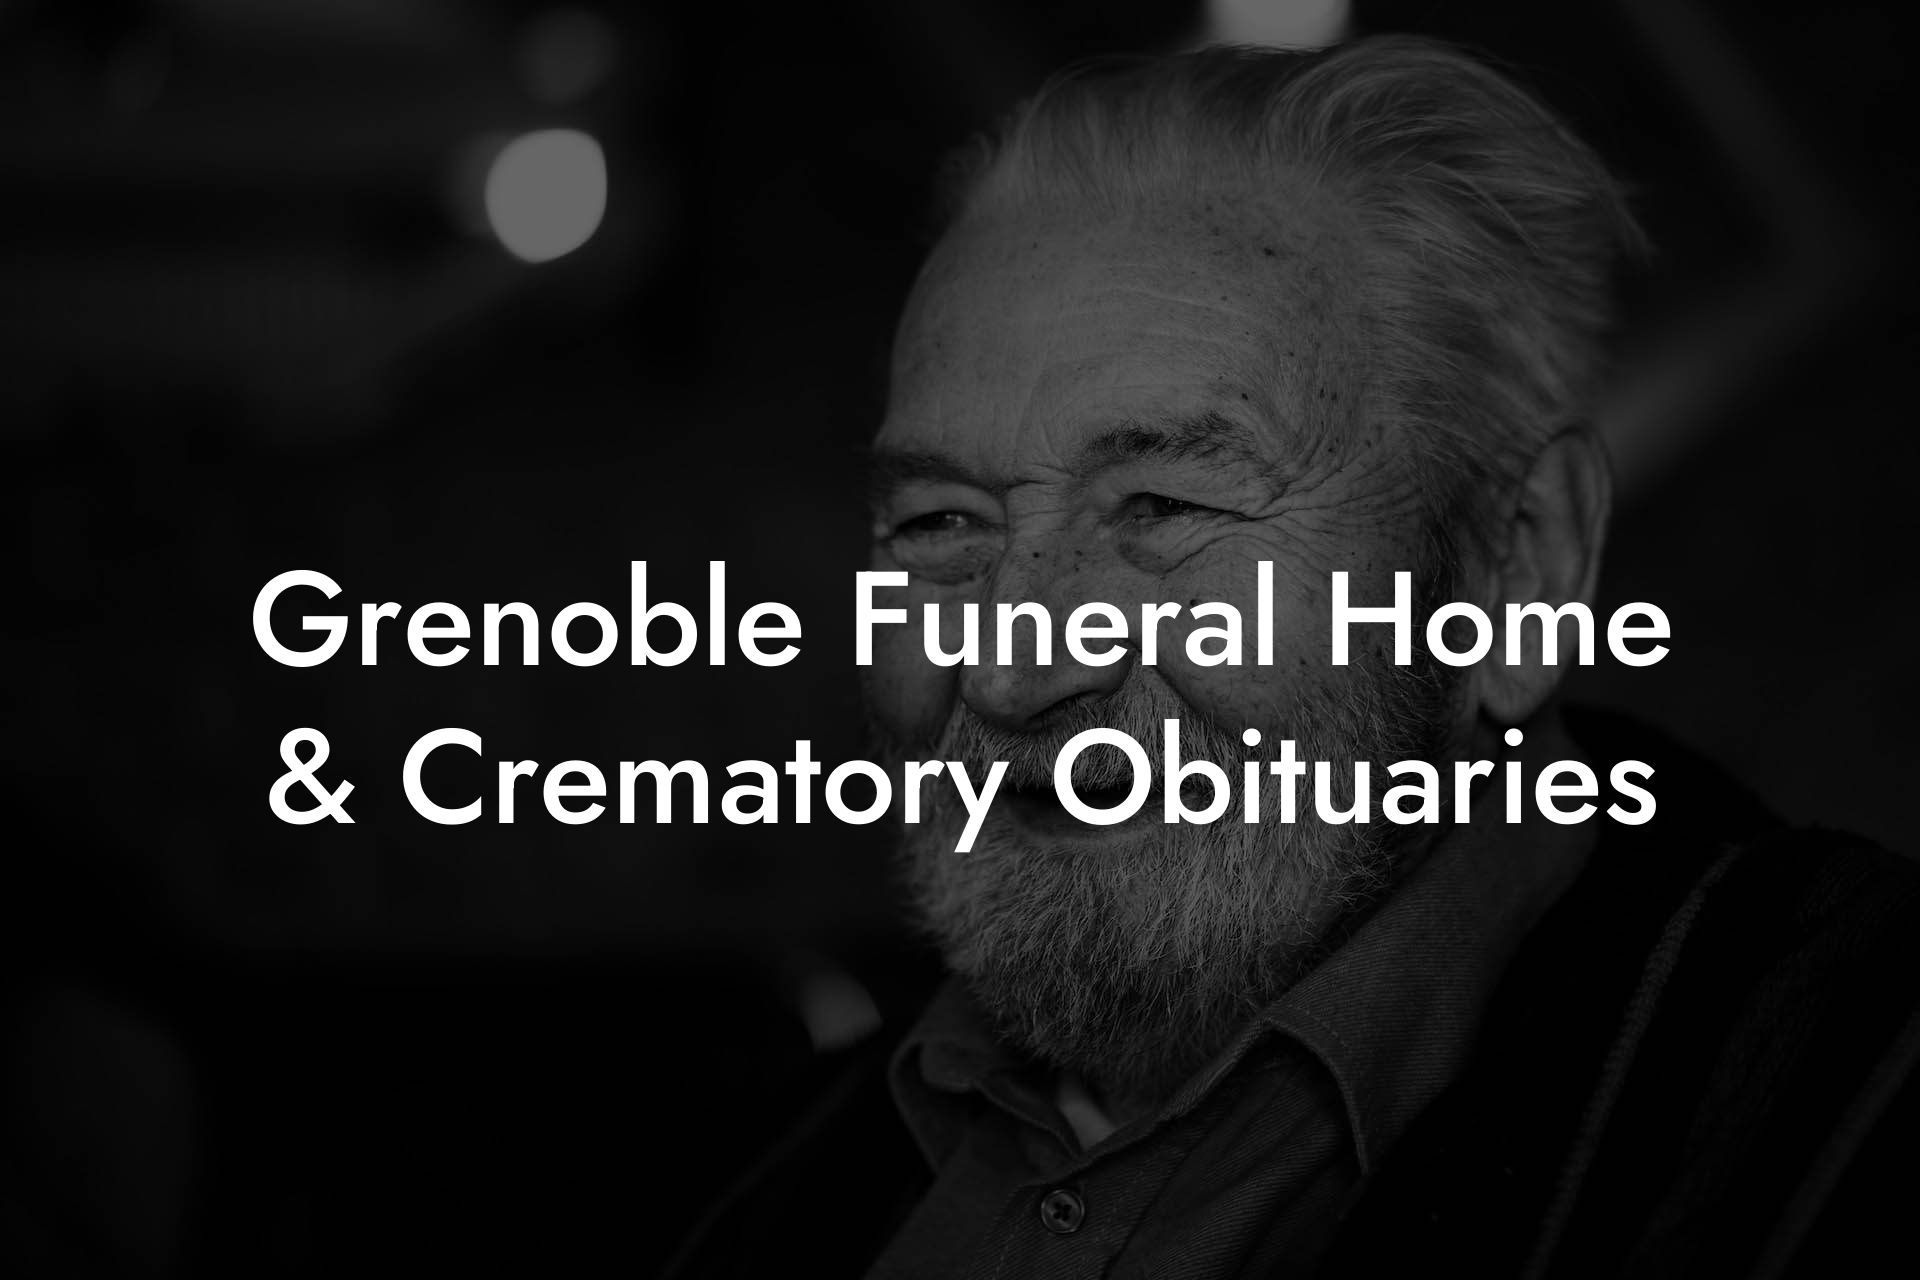 Grenoble Funeral Home & Crematory Obituaries